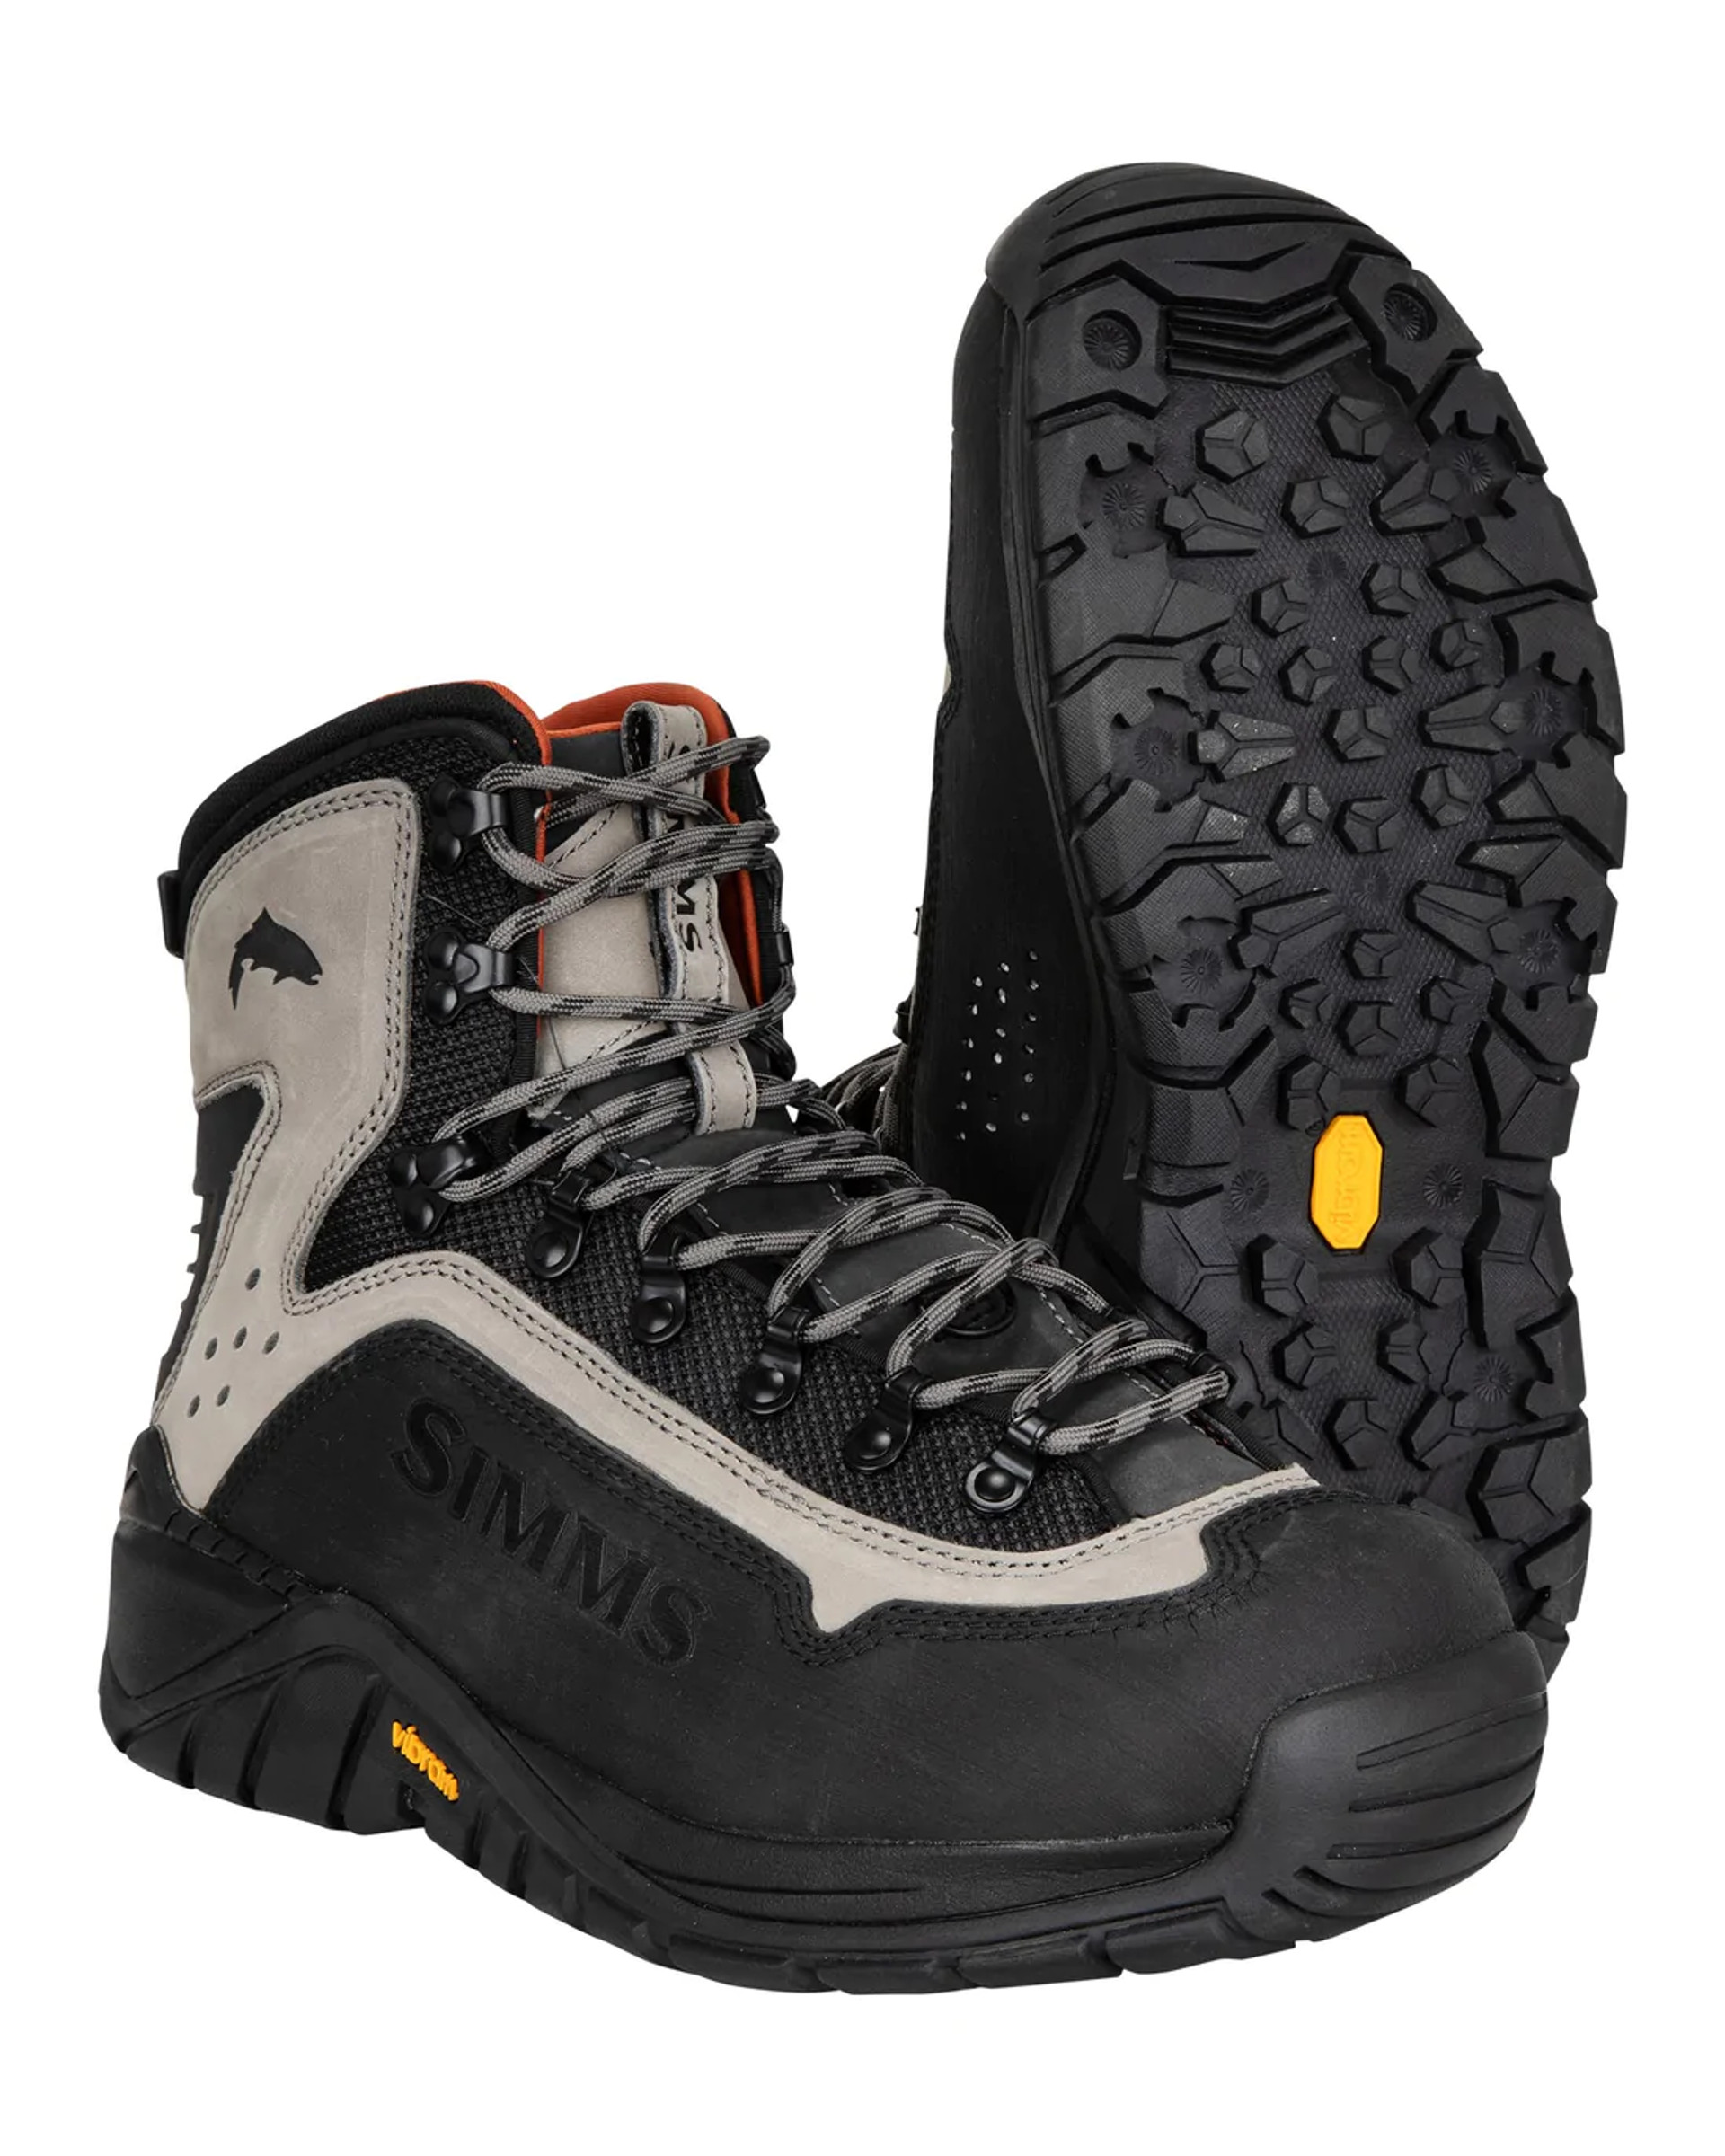 Fly Fishing Boots | Purchase Your Fly Fishing Wading Boots Online - FishUSA